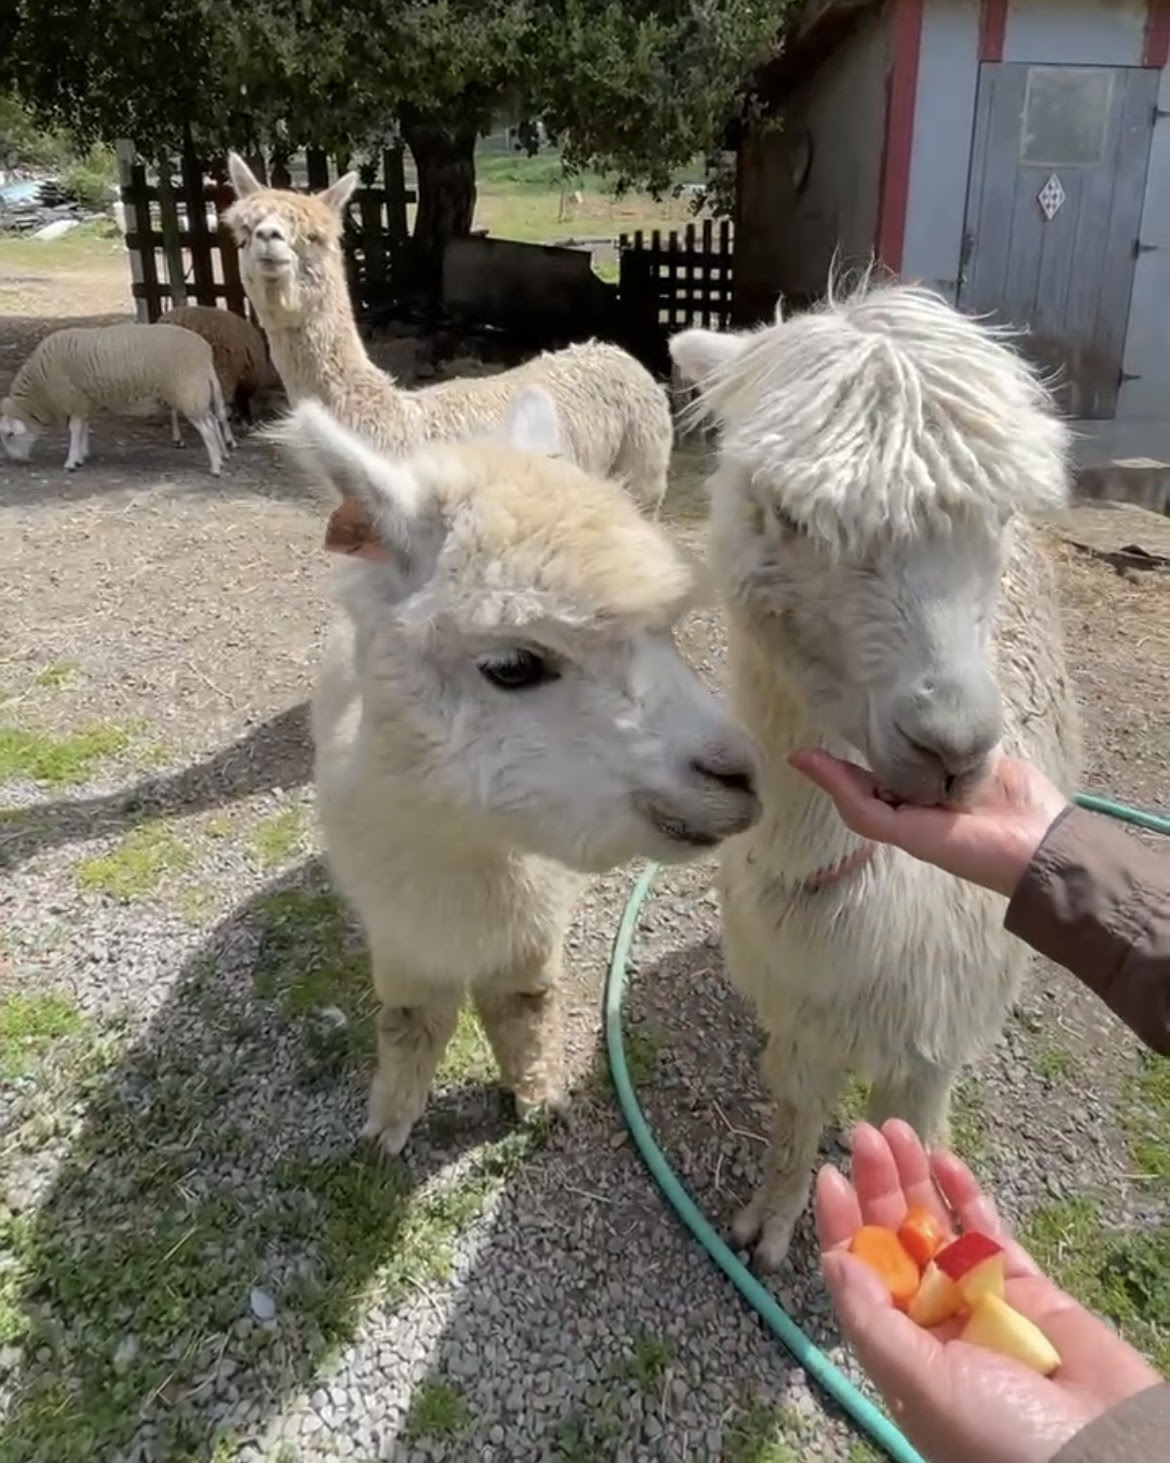 My mom feeding two llamas while one looks at us